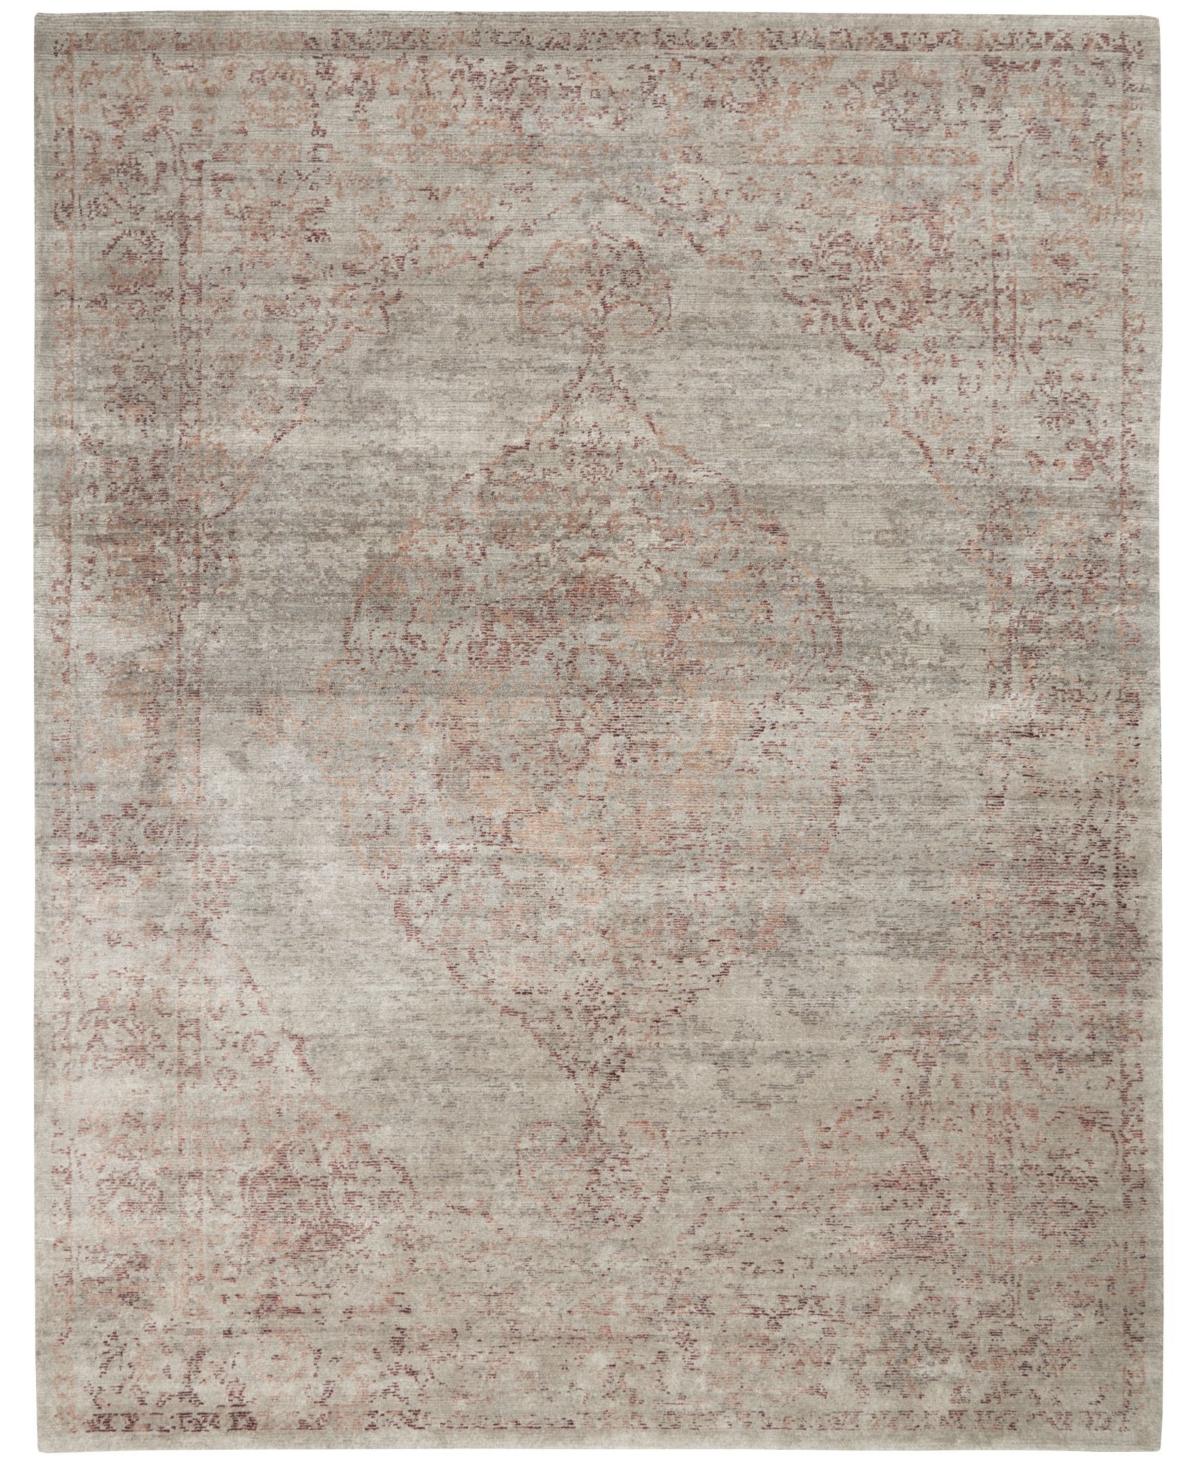 Nourison Home Lucent LCN07 Silver and Red 7'9in x 9'9in Area Rug - Silver/red